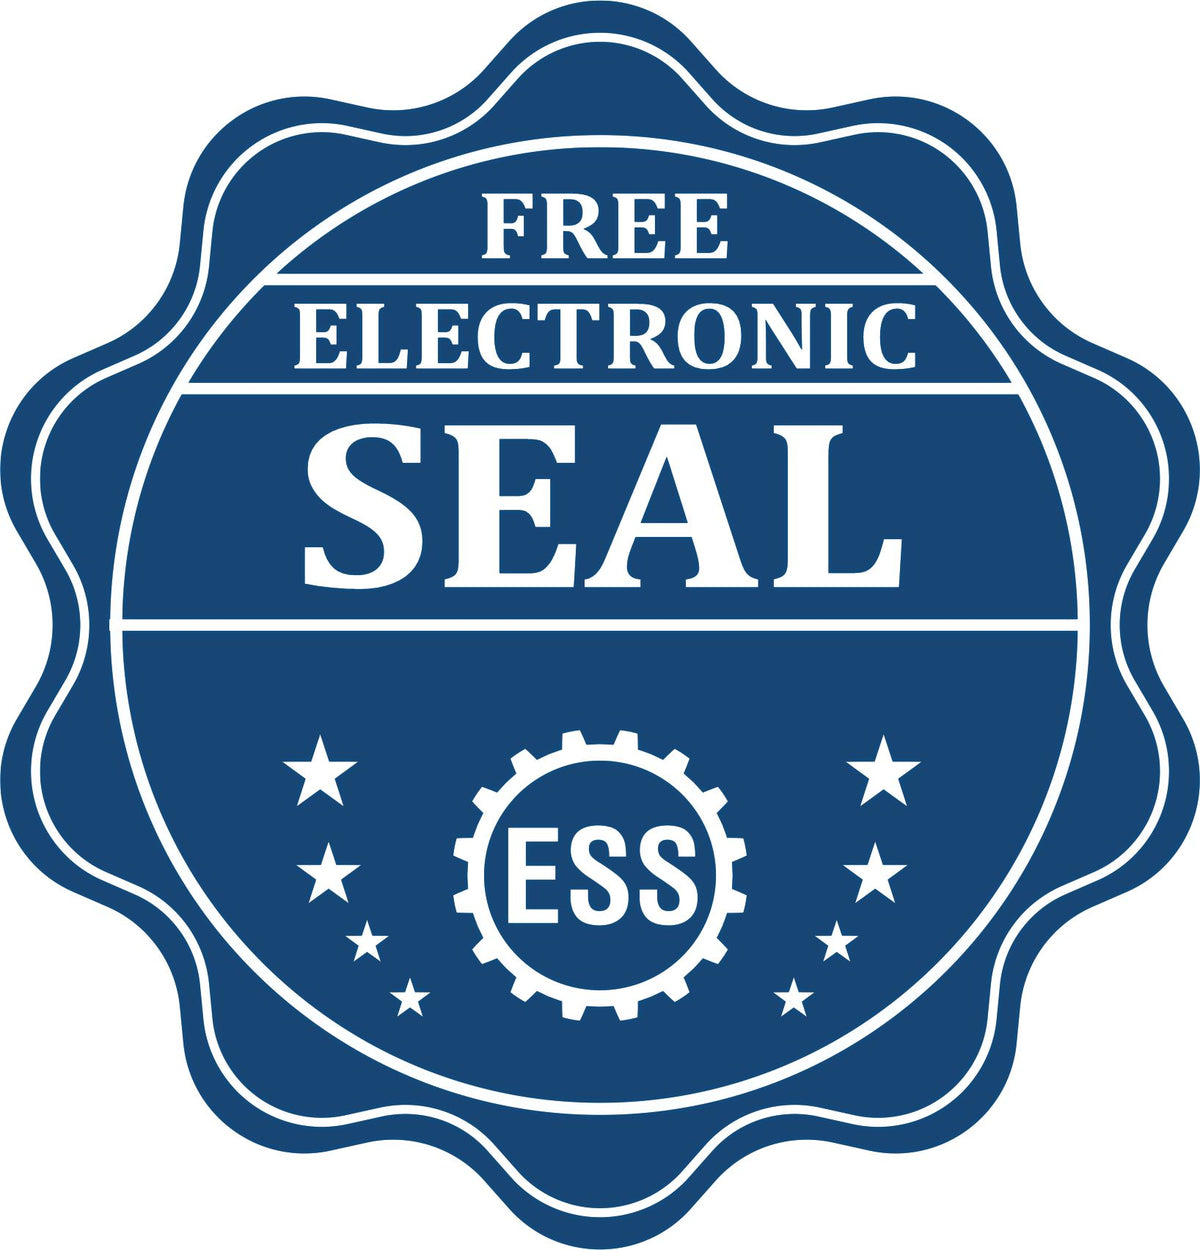 A badge showing a free electronic seal for the Heavy Duty Cast Iron Kansas Architect Embosser with stars and the ESS gear on the emblem.